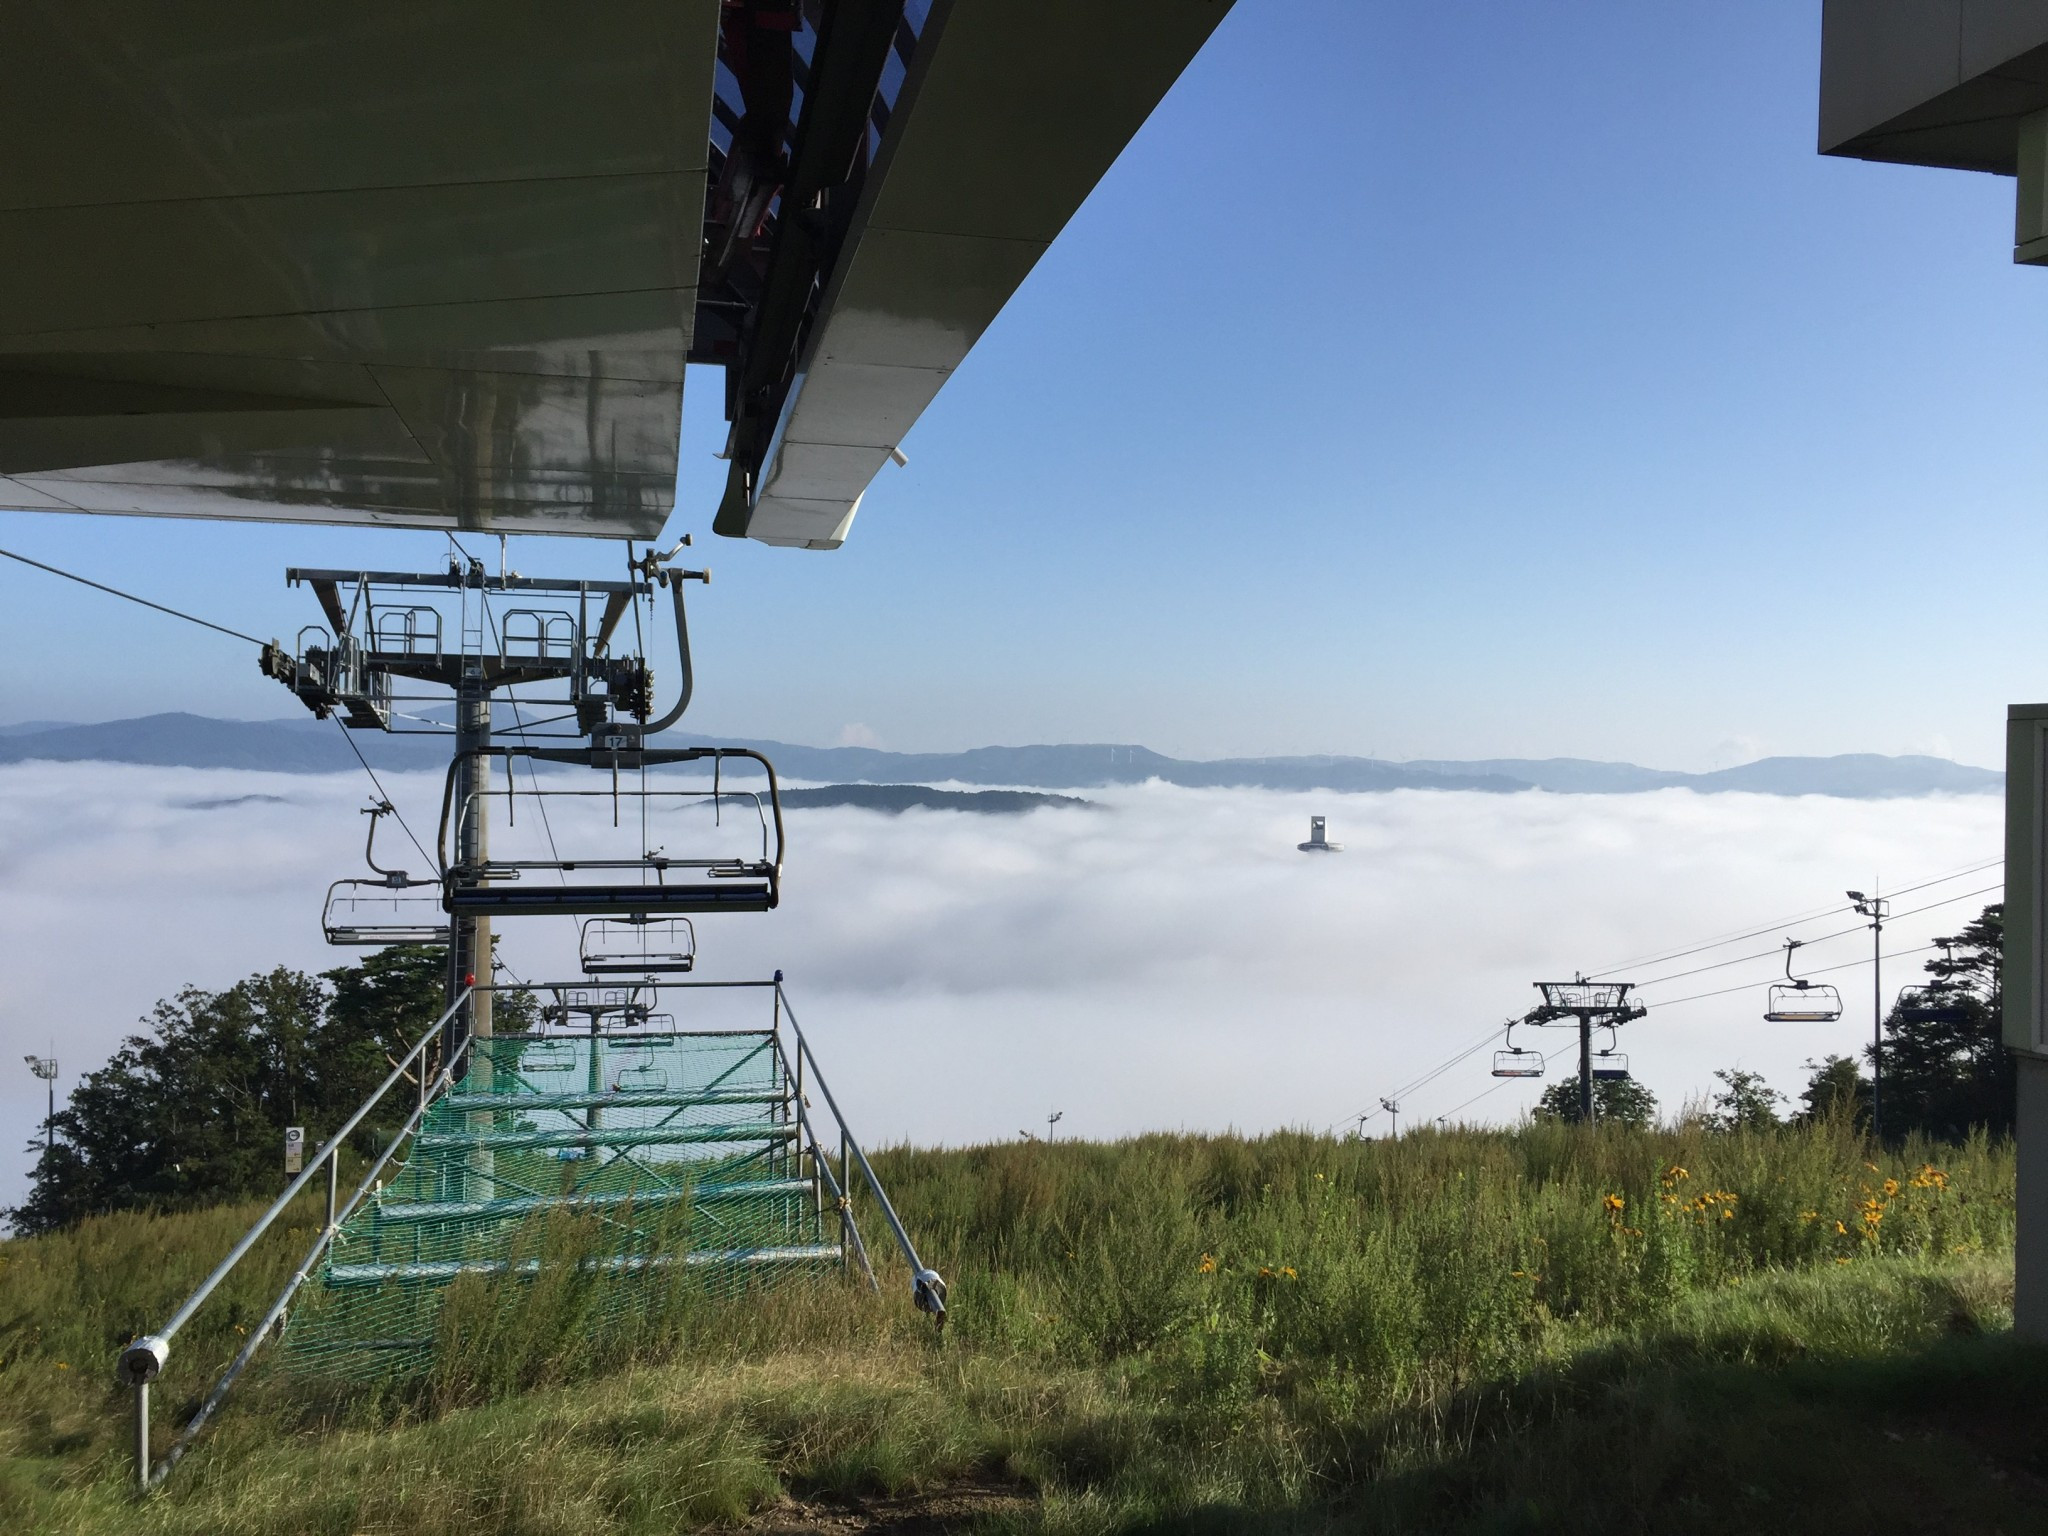 A view into the mist-strewn valley where the Alpensia hub is housed and where he top of the ski jumping tower for Pyeongchang 2018 is just visible above the clouds ©Lorna Campbell